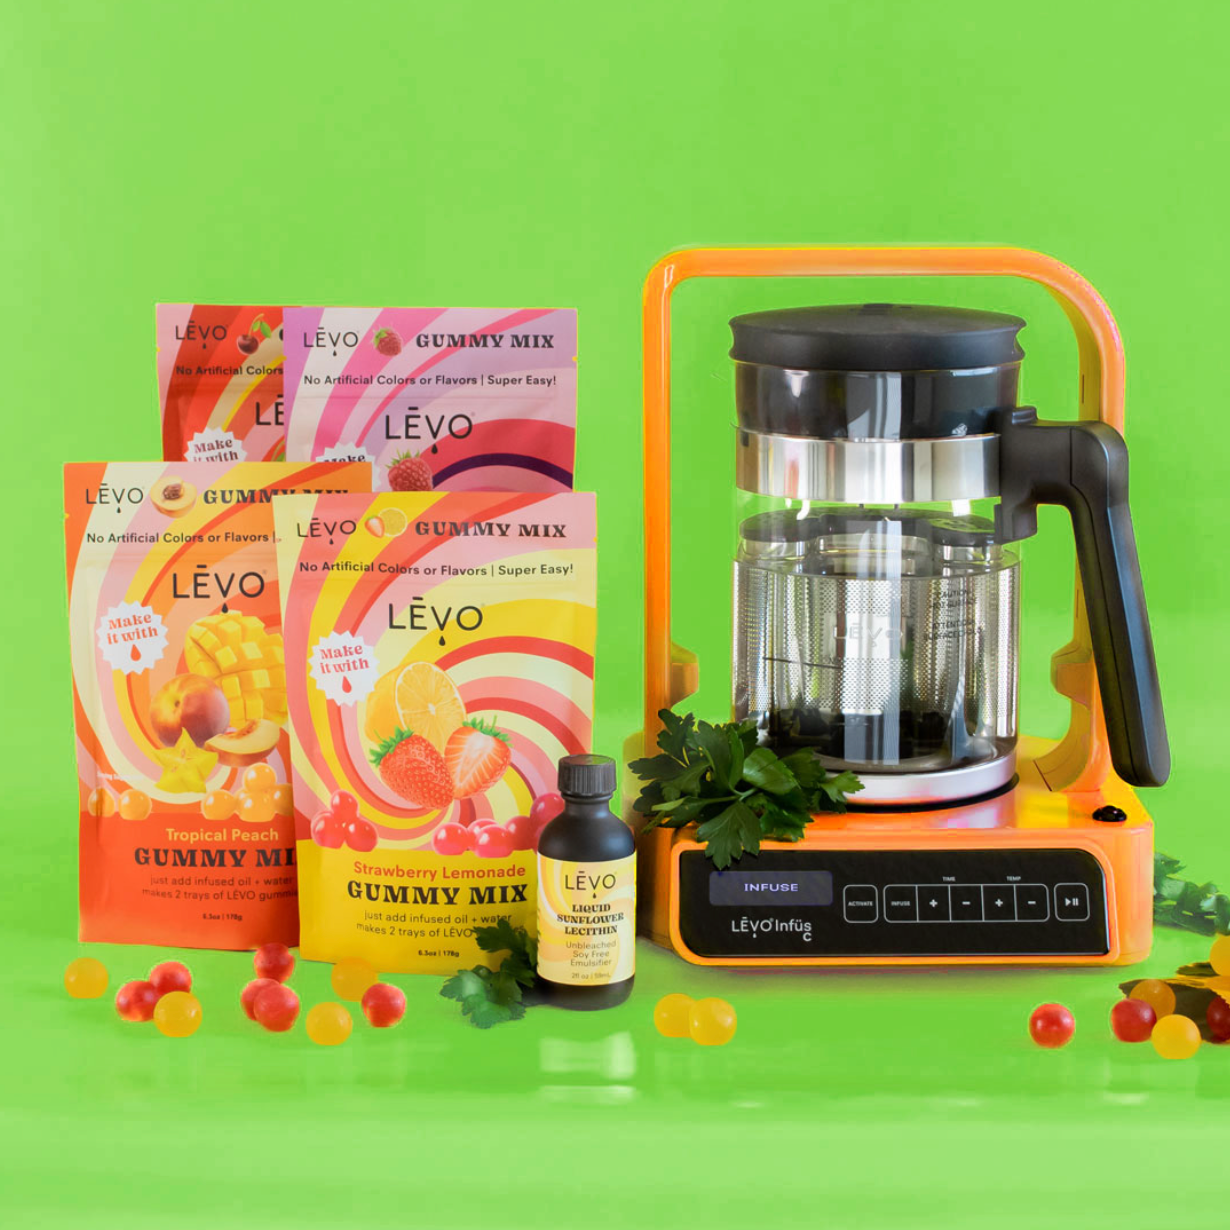 LĒVO C in Satsuma Orange. Replicate your favorite infusions with LĒVO C's precise controls. Jumbo Pod included to hold 1 ounce of dry herbs.